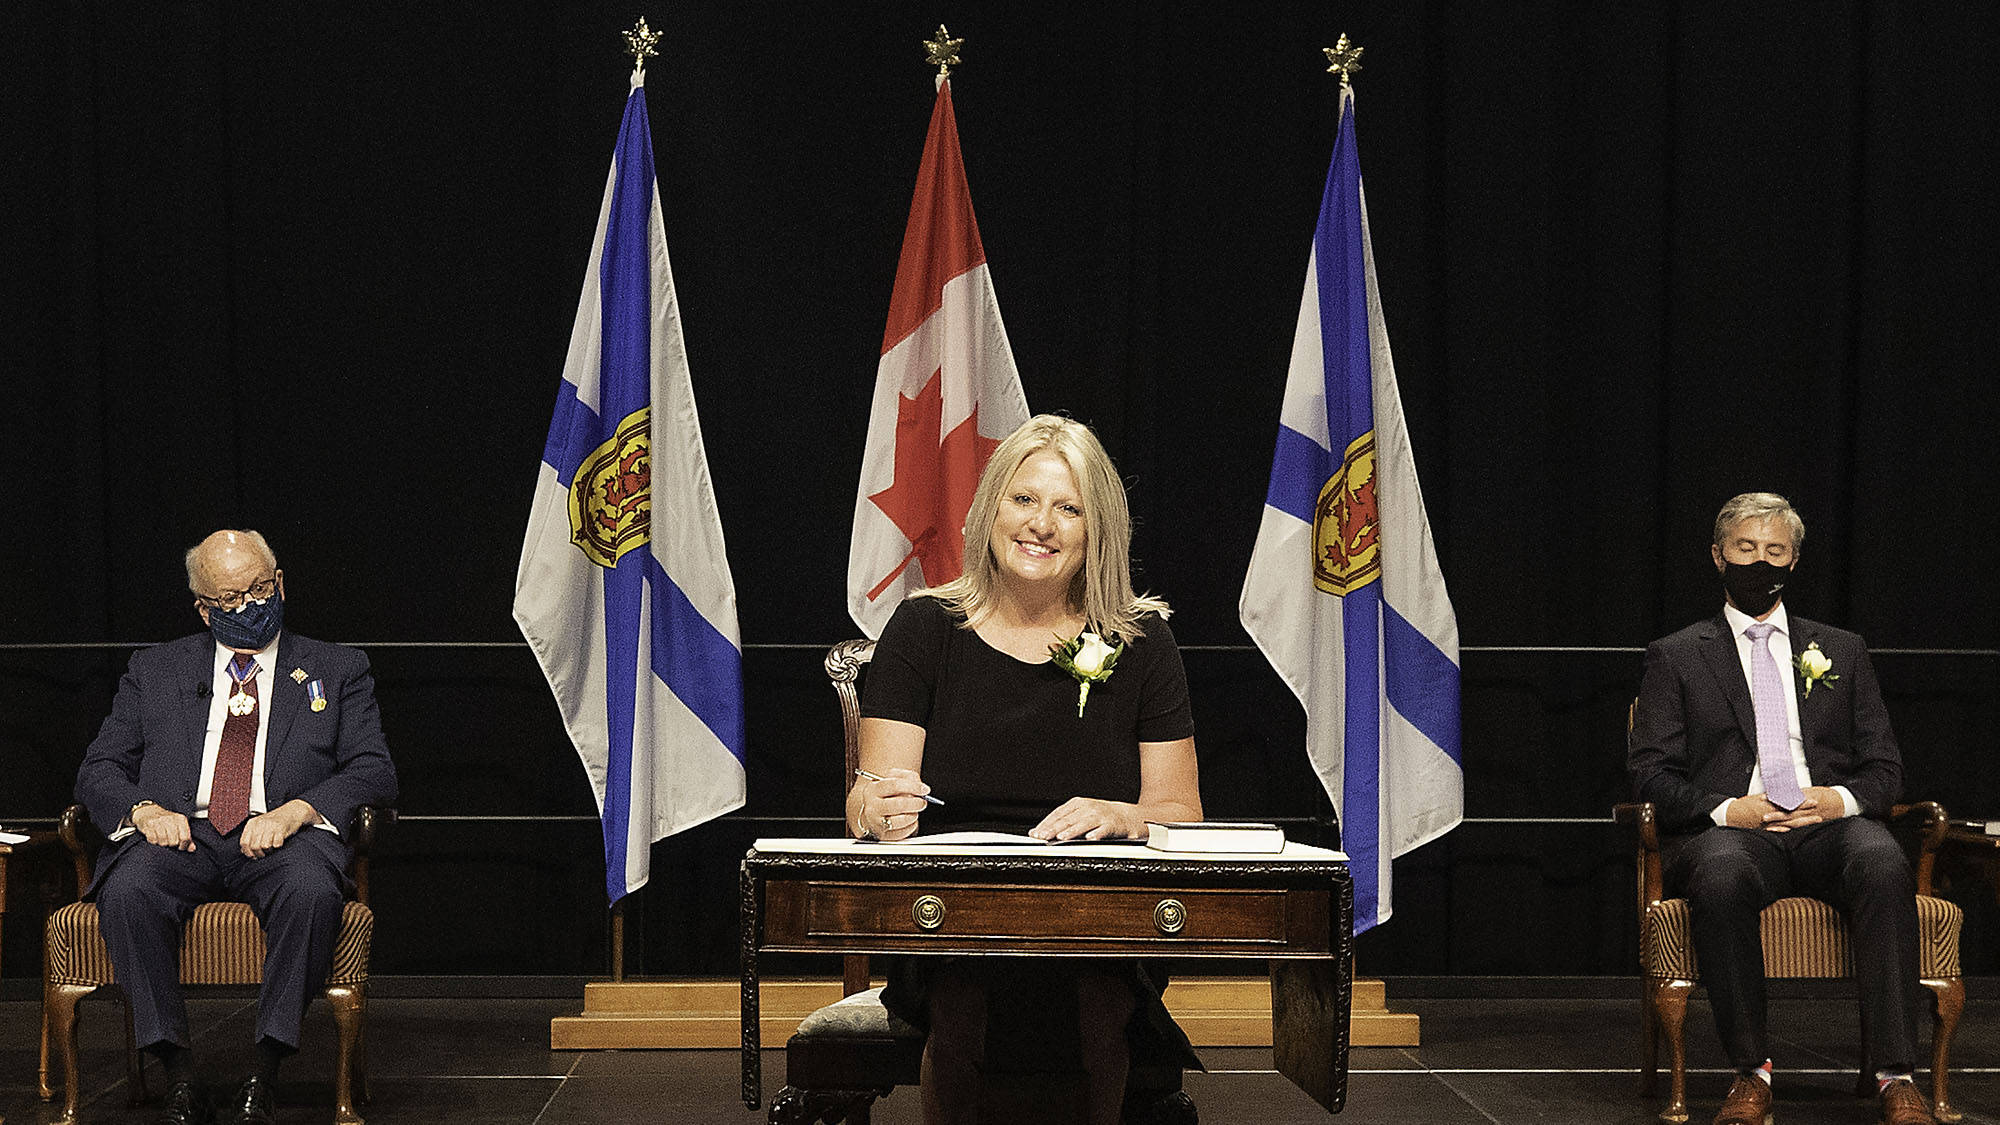 Public Works Minister Kim Masland being sworn in as a cabinet minister in Halifax on Aug. 31, 2021.